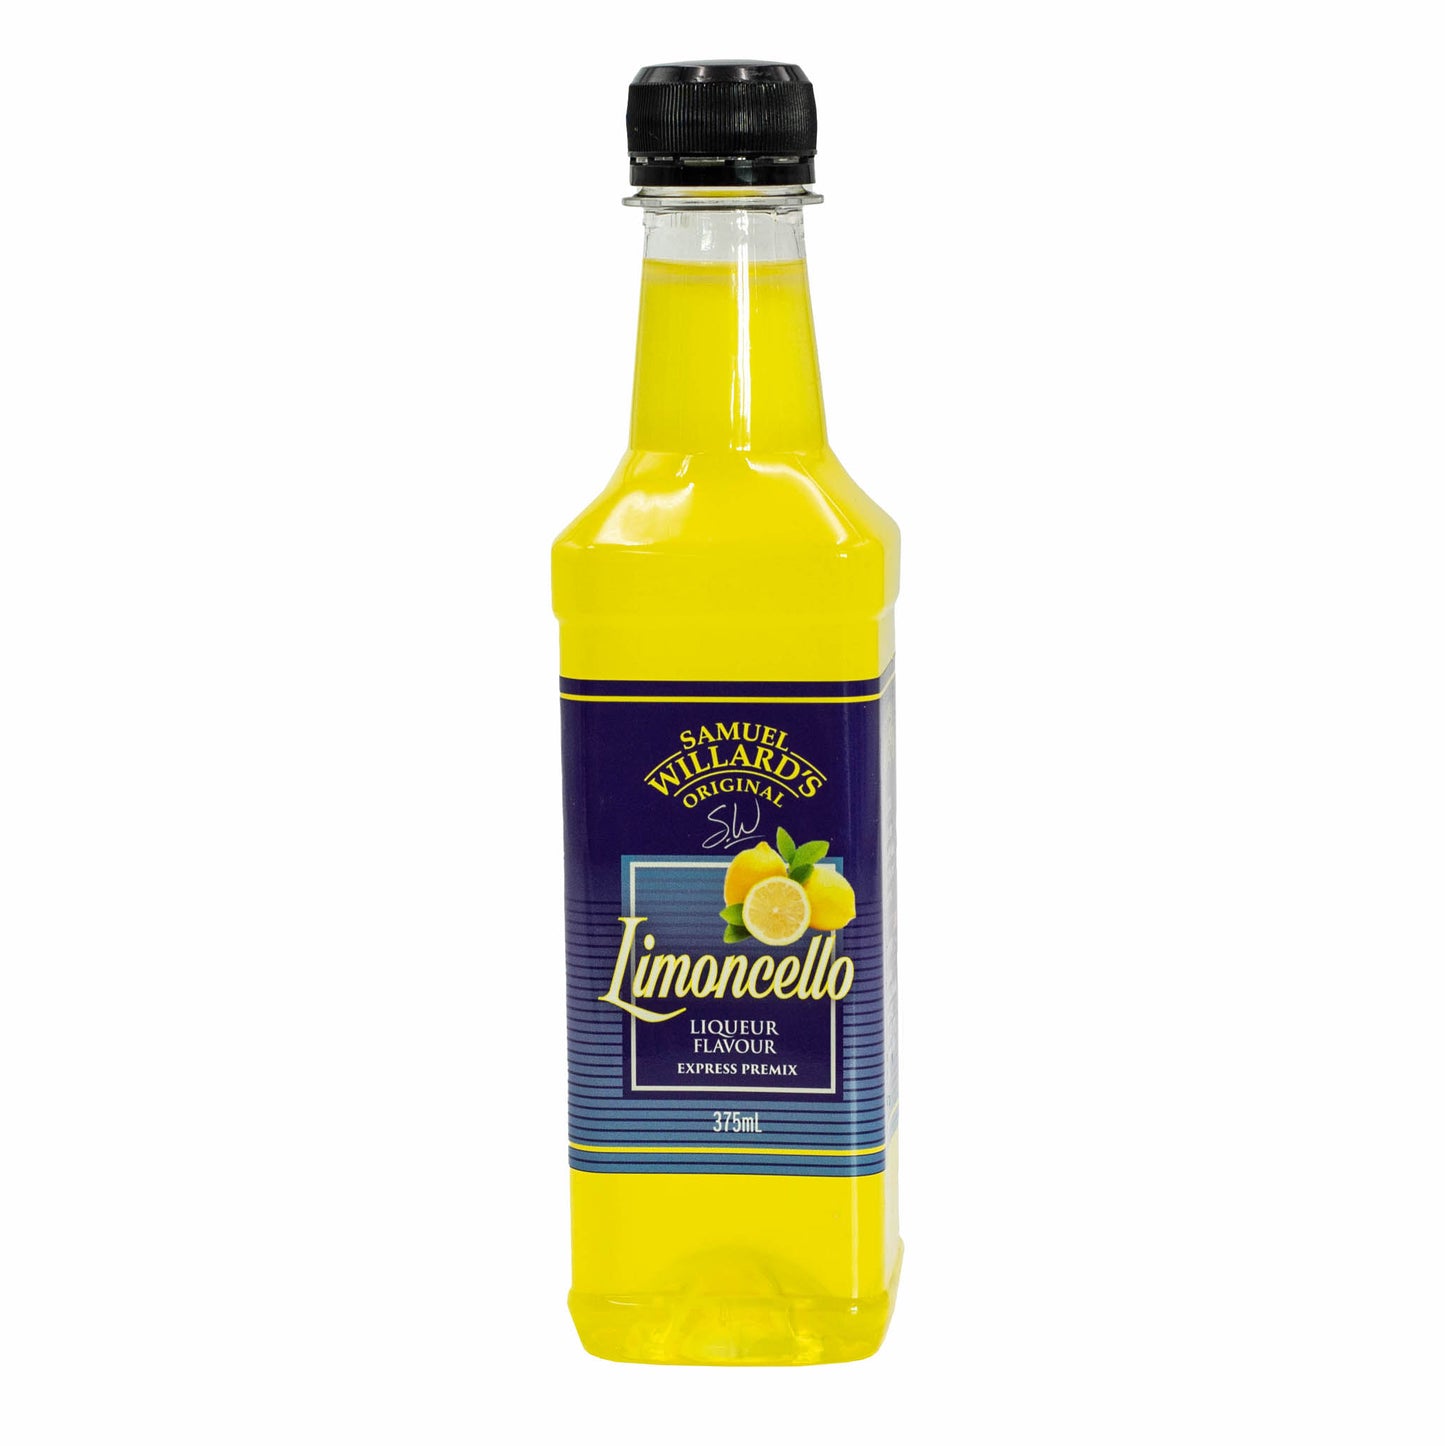 Samuel Willards Limoncello premix. Will make 1125ml of finished product from each 375ml bottle